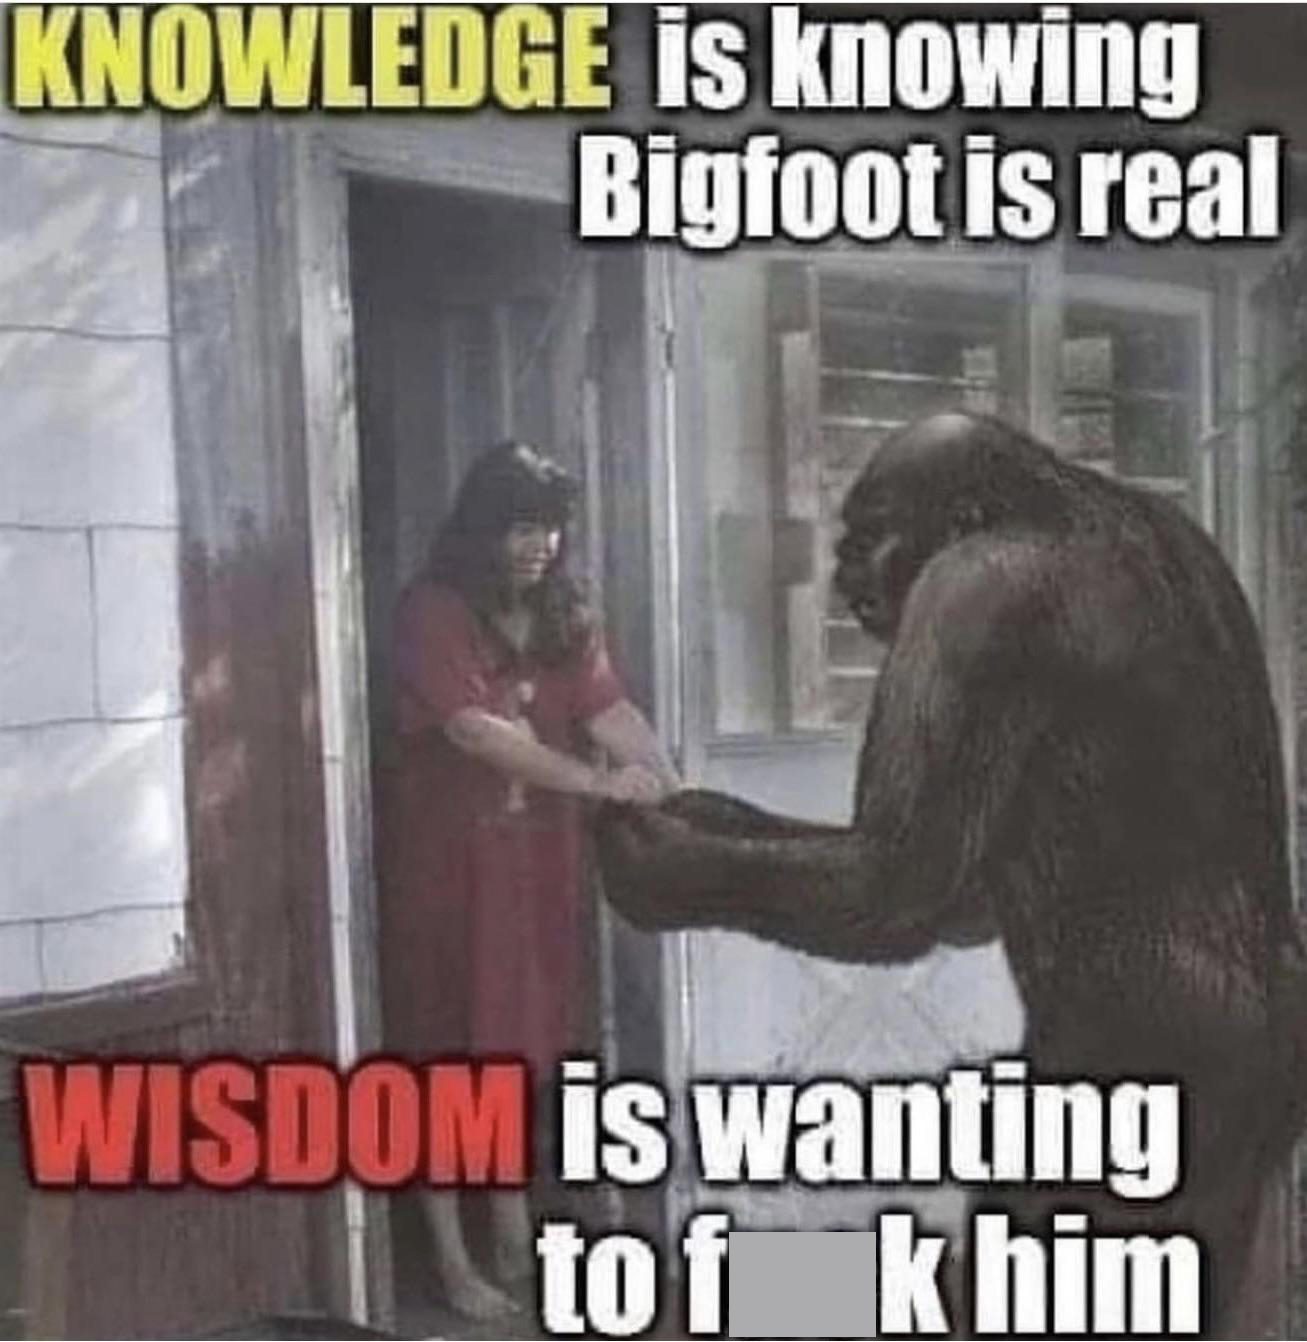 Knowledge - Knowledge is knowing Bigfoot is real Wisdom is wanting tof k him